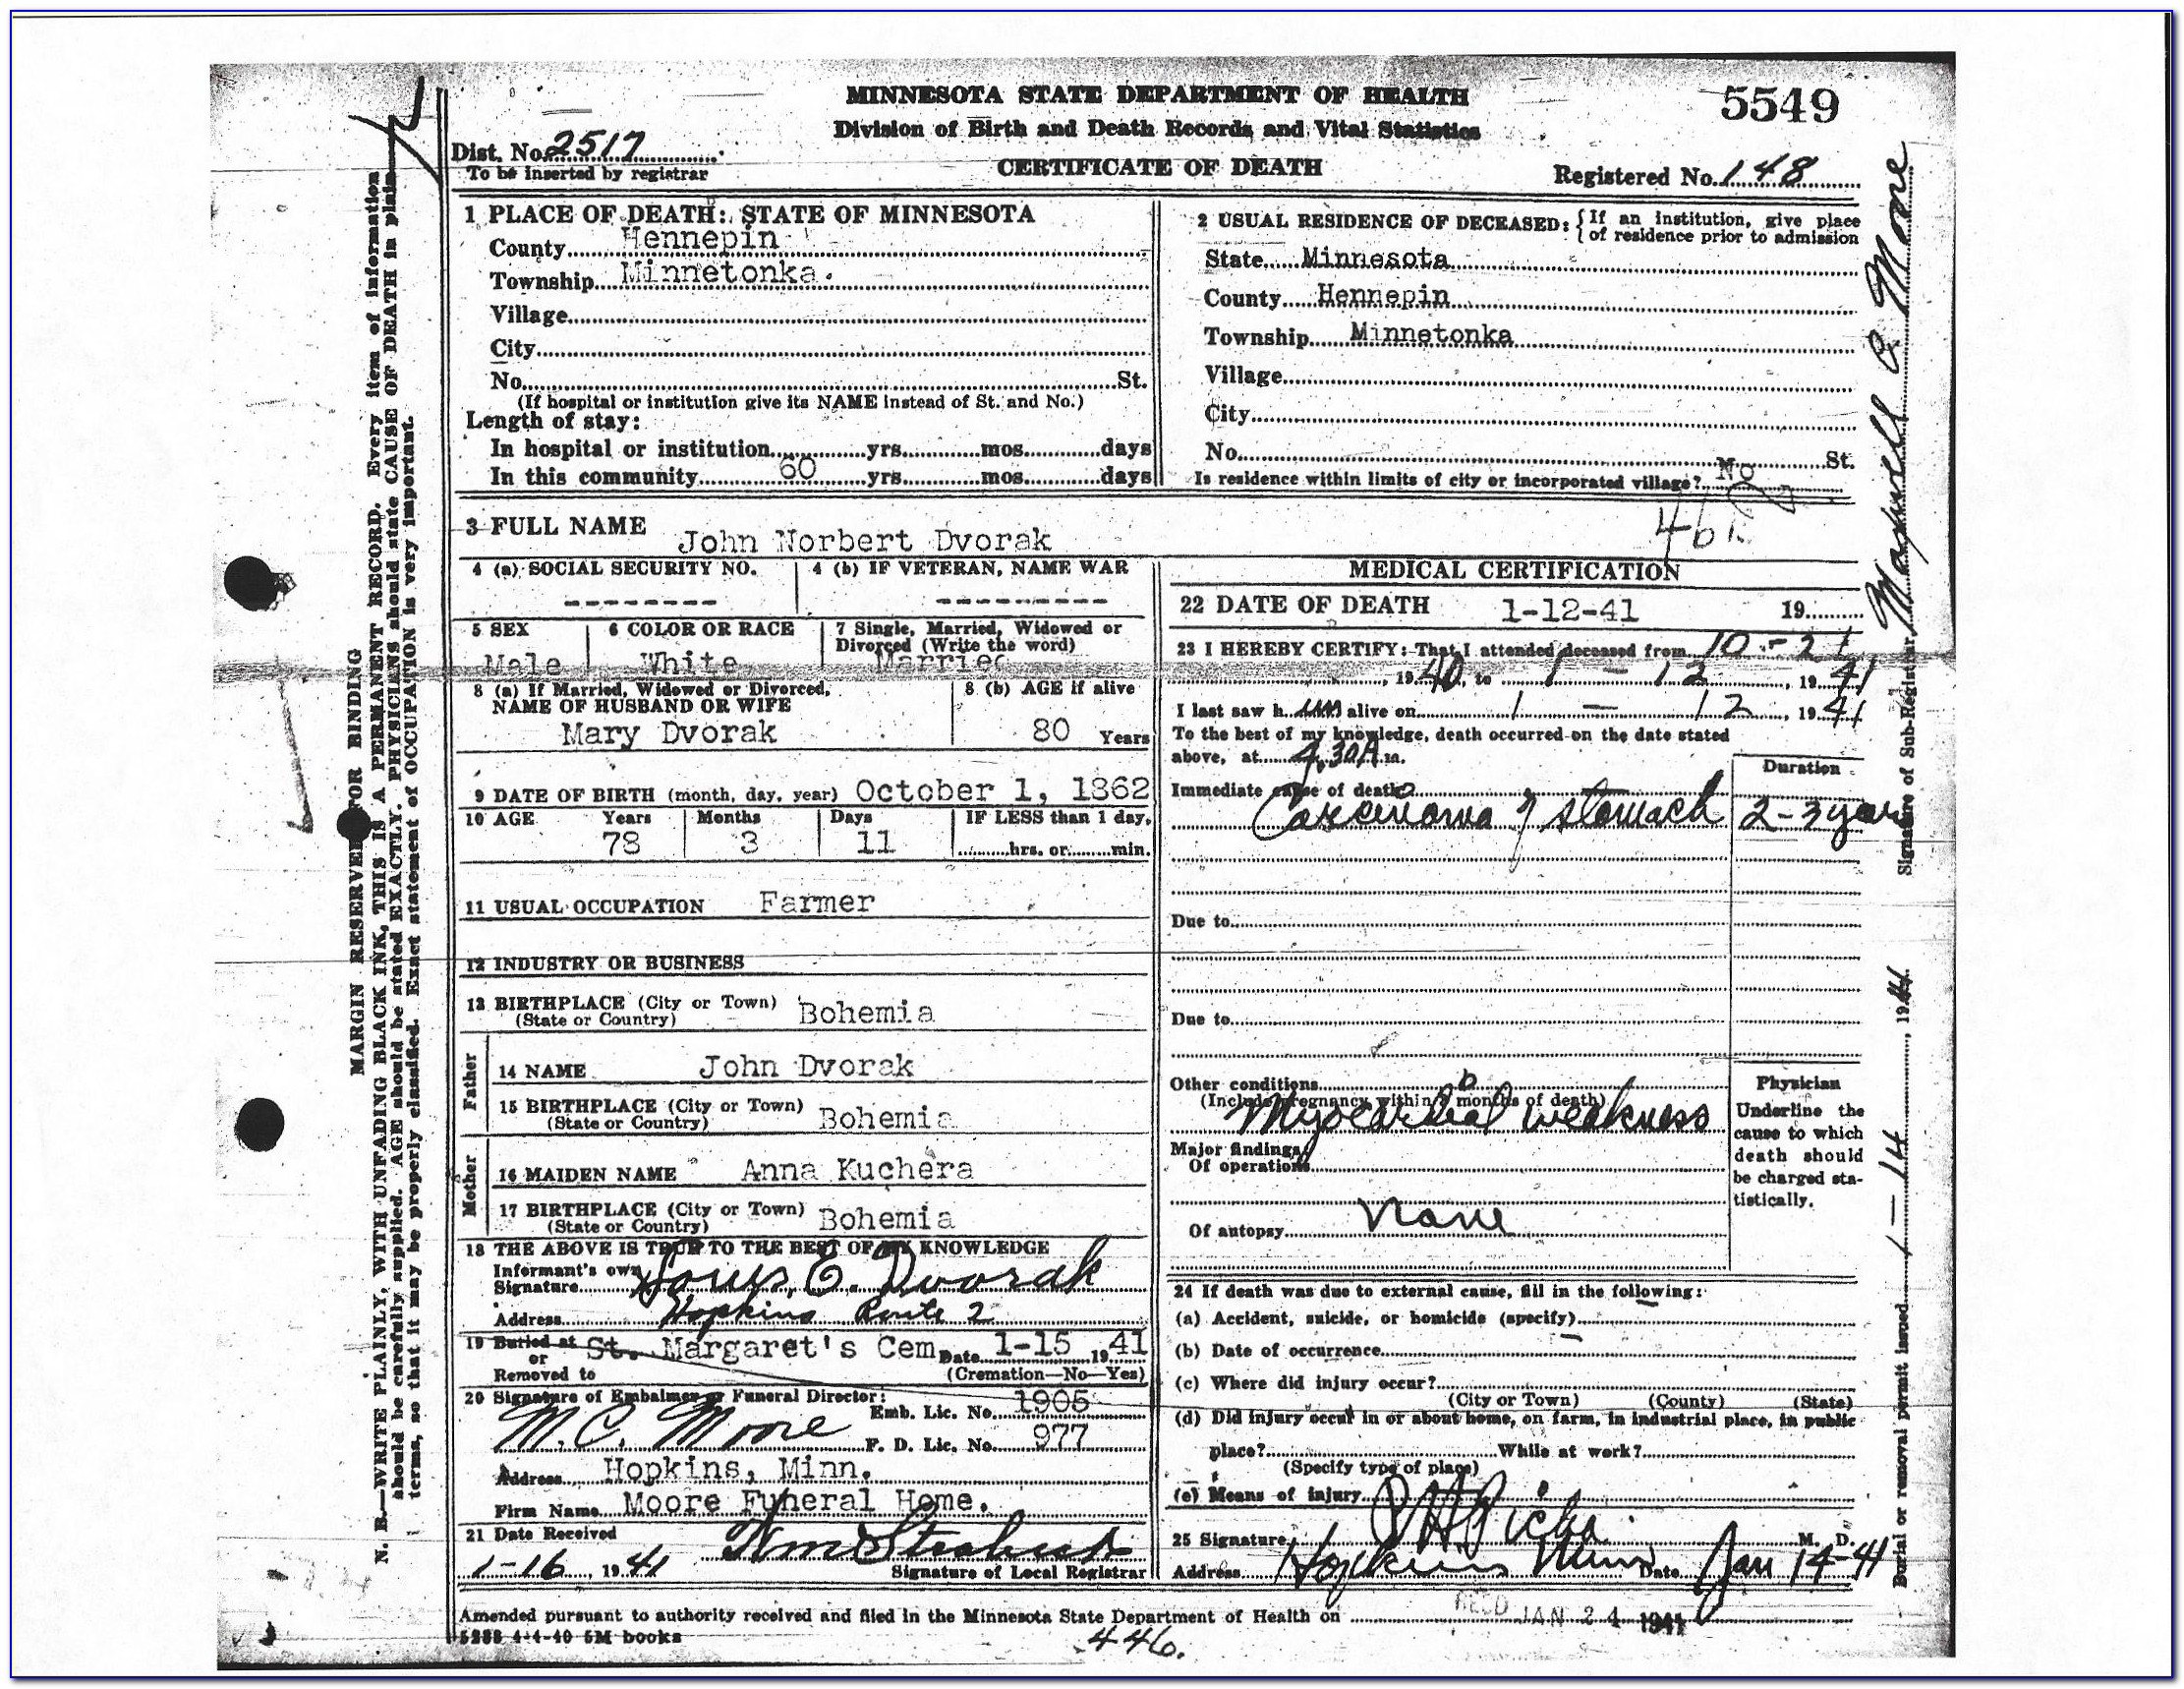 Stanislaus County Vital Records Death Certificate